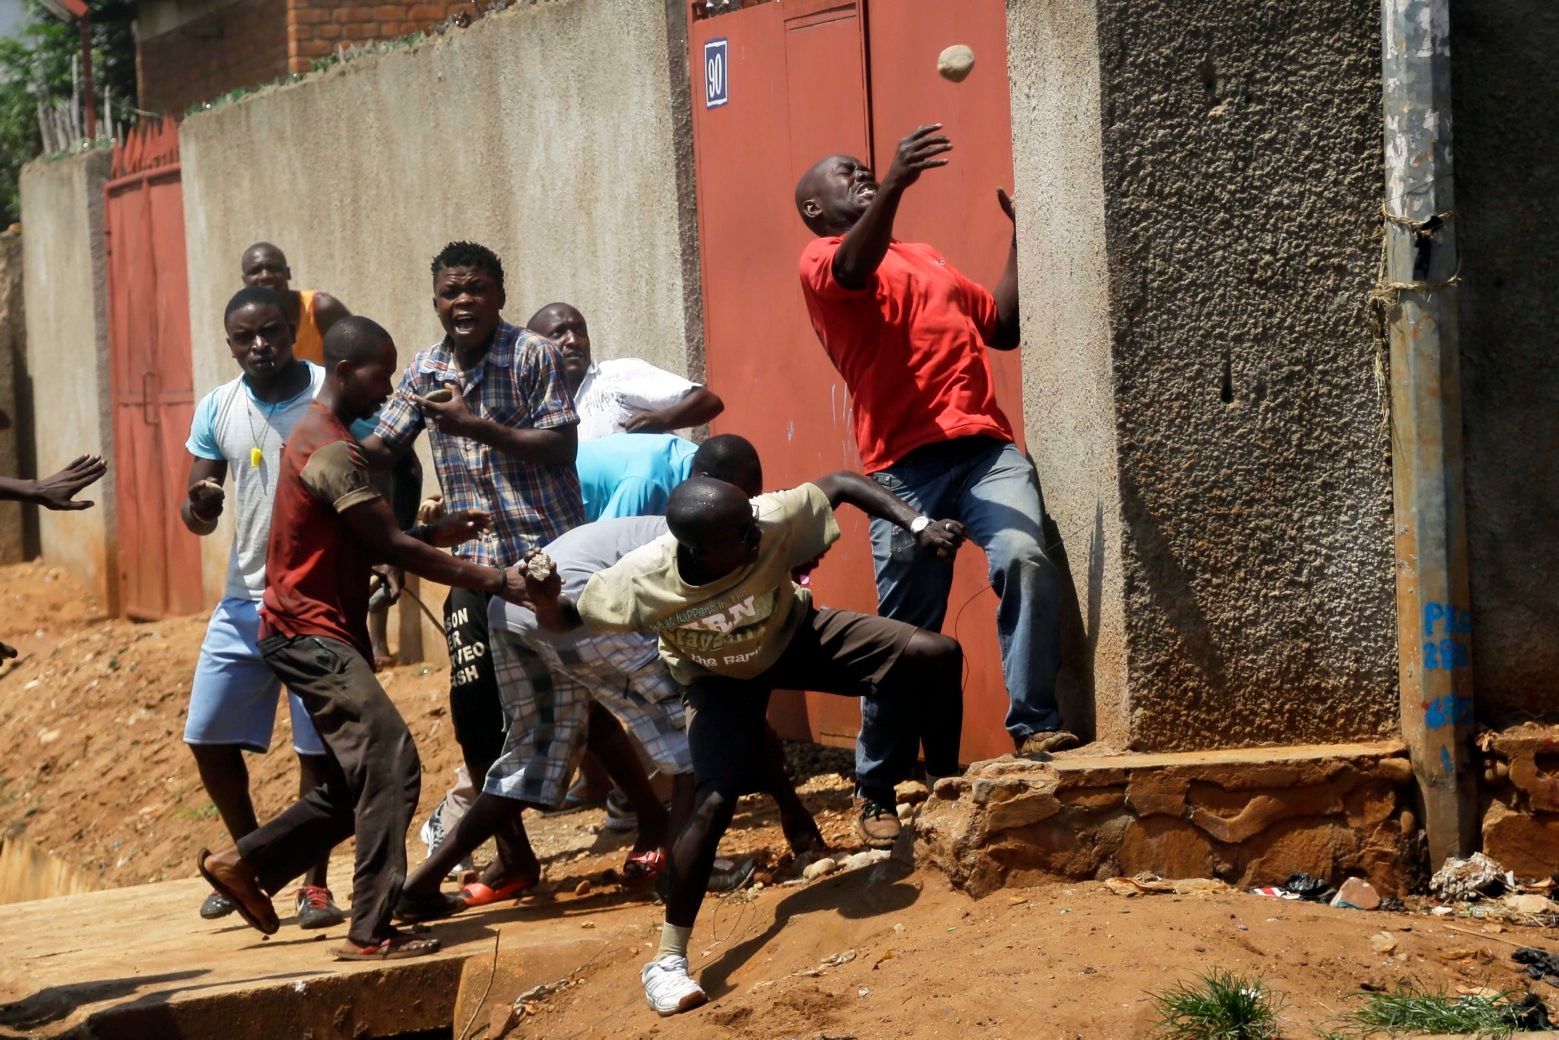 Protester throw stones at police during clashes in the Nyakabyga neighborhood of Bujumbura, Burundi, Thursday May 21, 2015. Protests continue against the  President's decision to seek a third term.  ( AP Photo/Jerome Delay)    APTOPIX Burundi Political Tensions